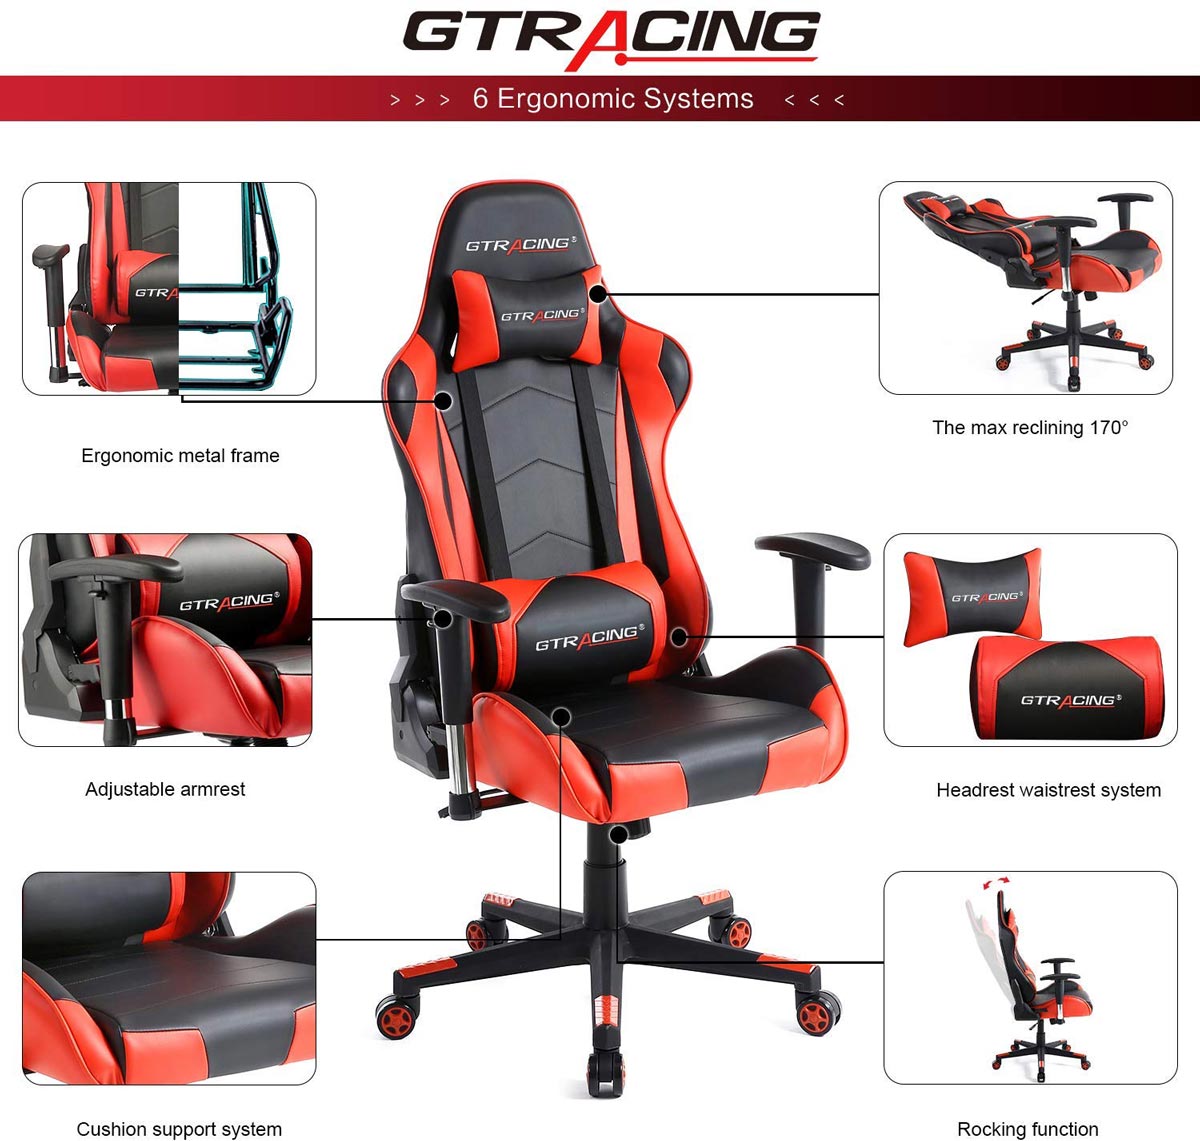 Some features of GTRacing gaming chairs